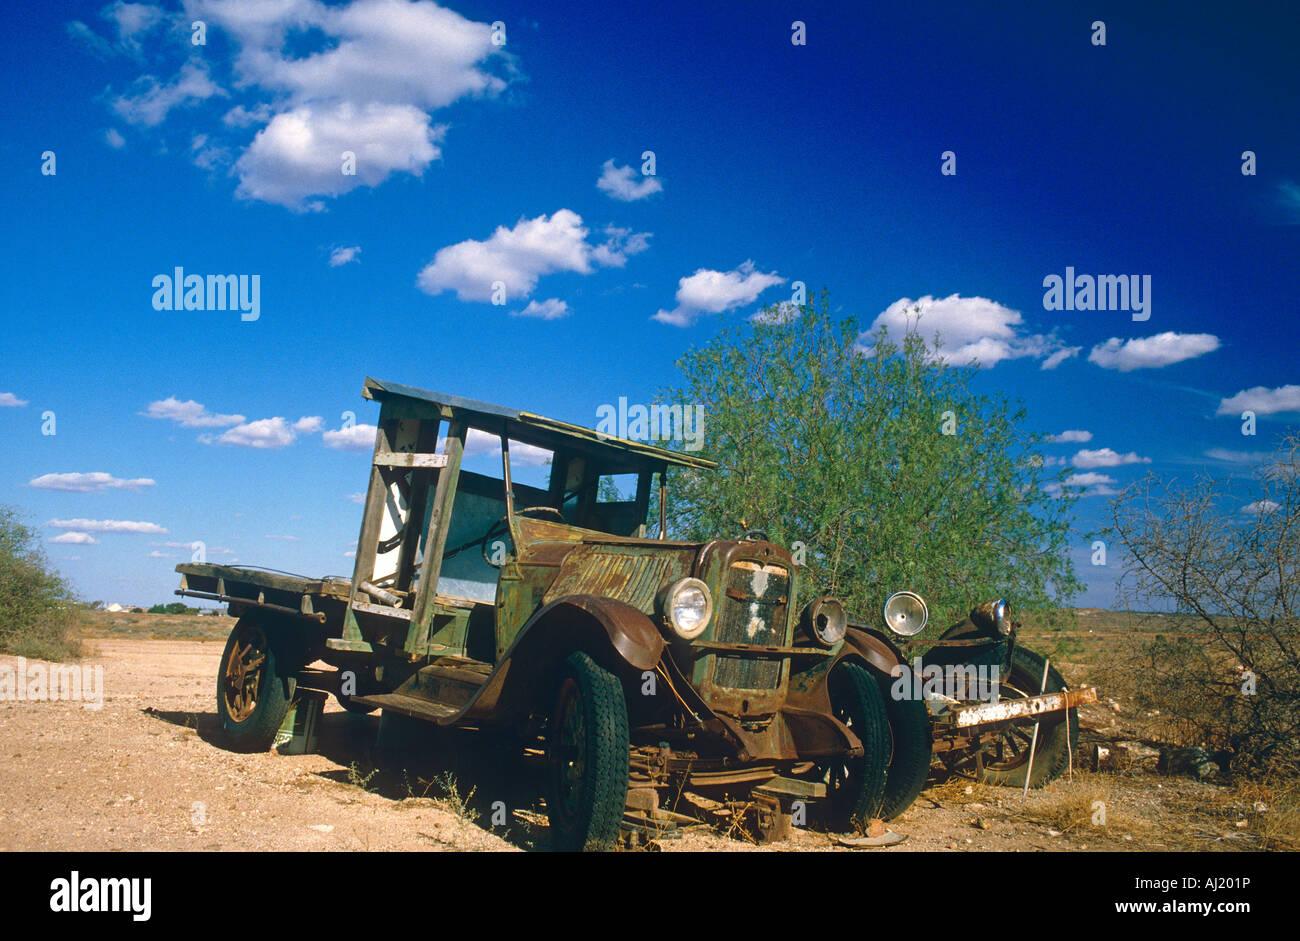 derelict vehicle in outback australia Stock Photo